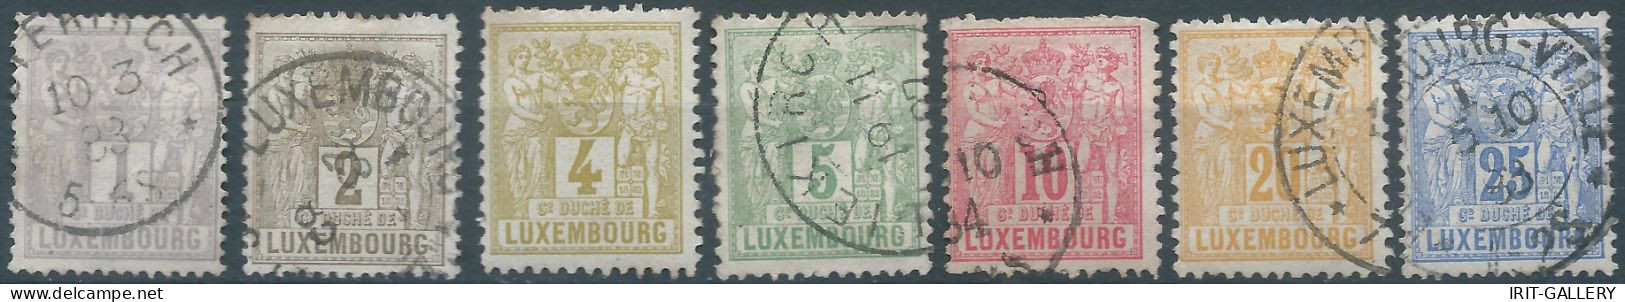 Lussemburgo - Luxembourg - 1882 Definitive Issue,Obliterated - 1882 Allegory